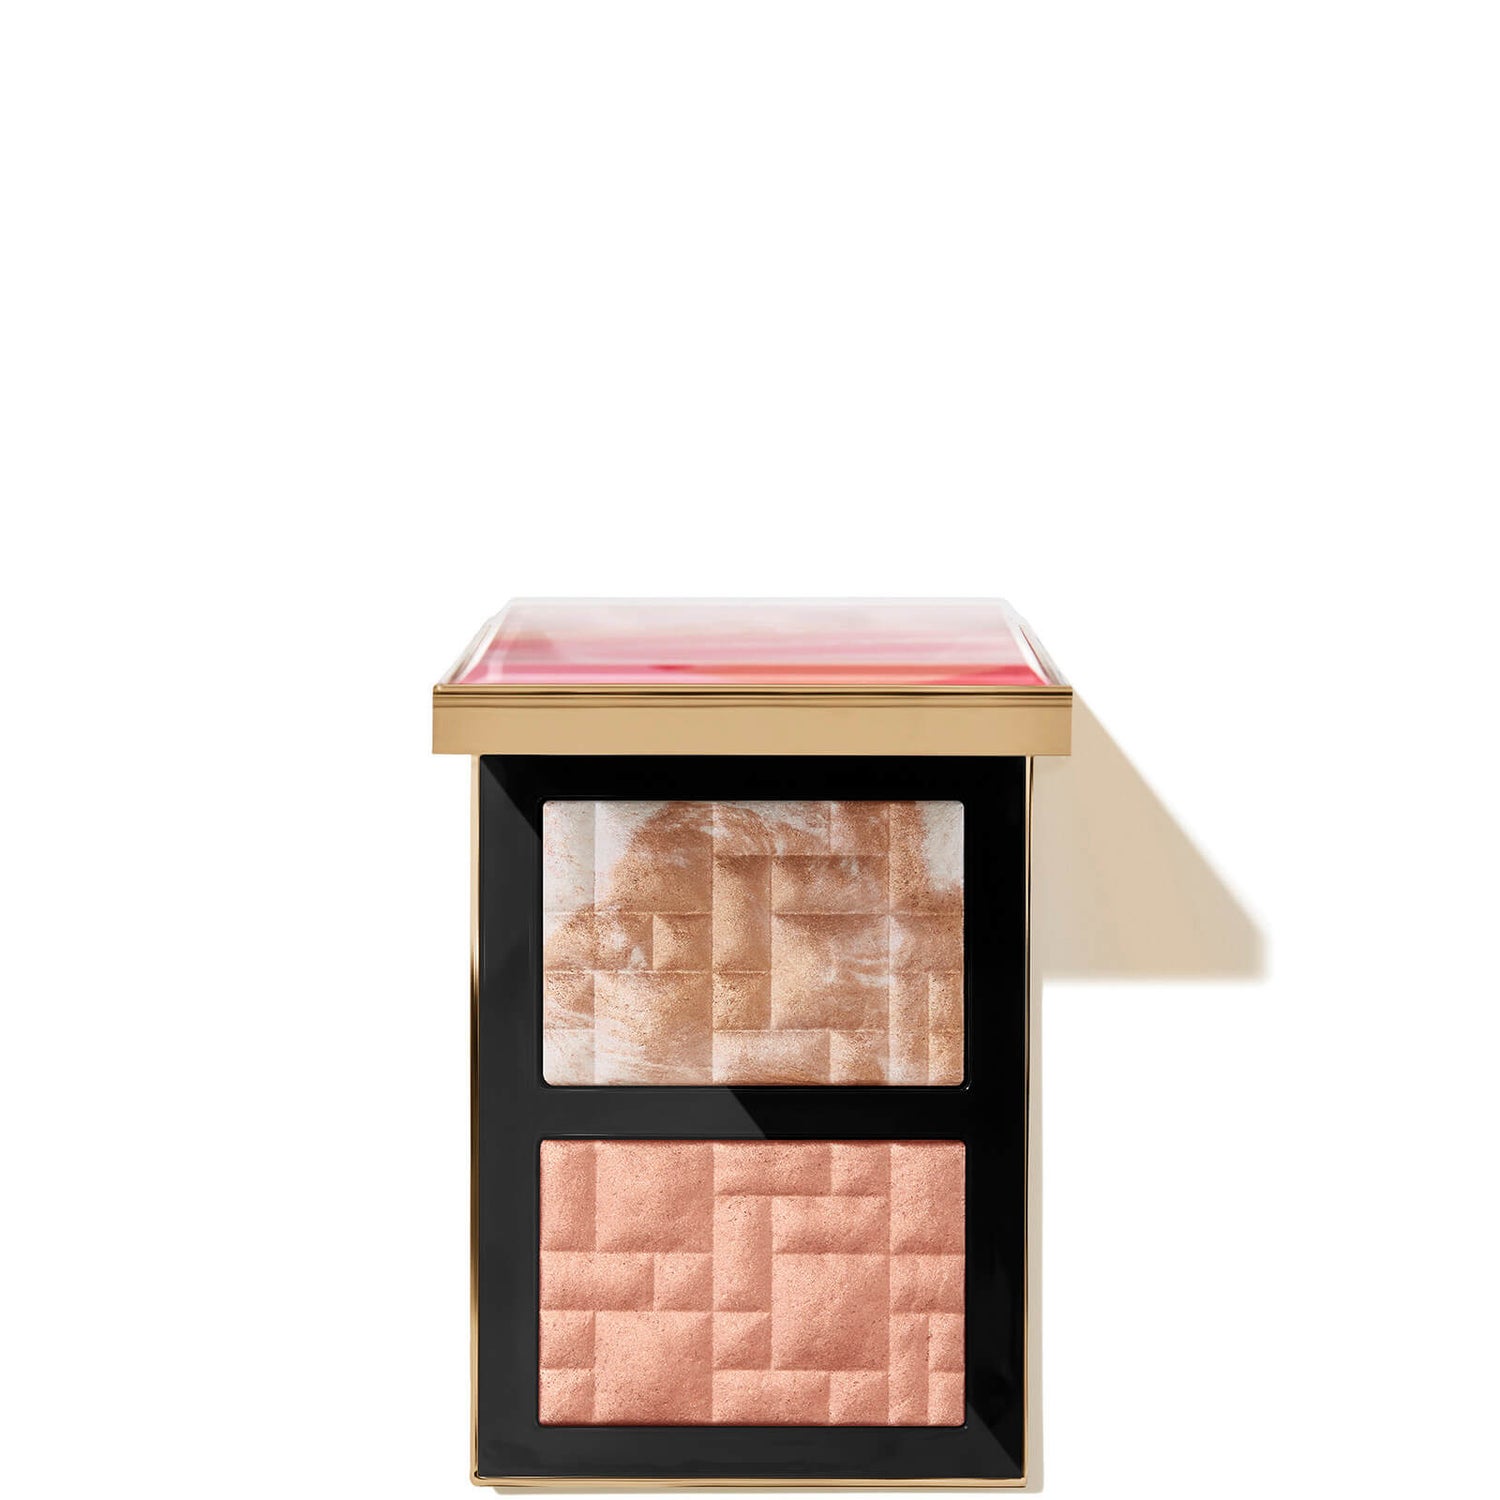 Duo d’Highlighters Bobbi Brown - Peach and Love 7 g